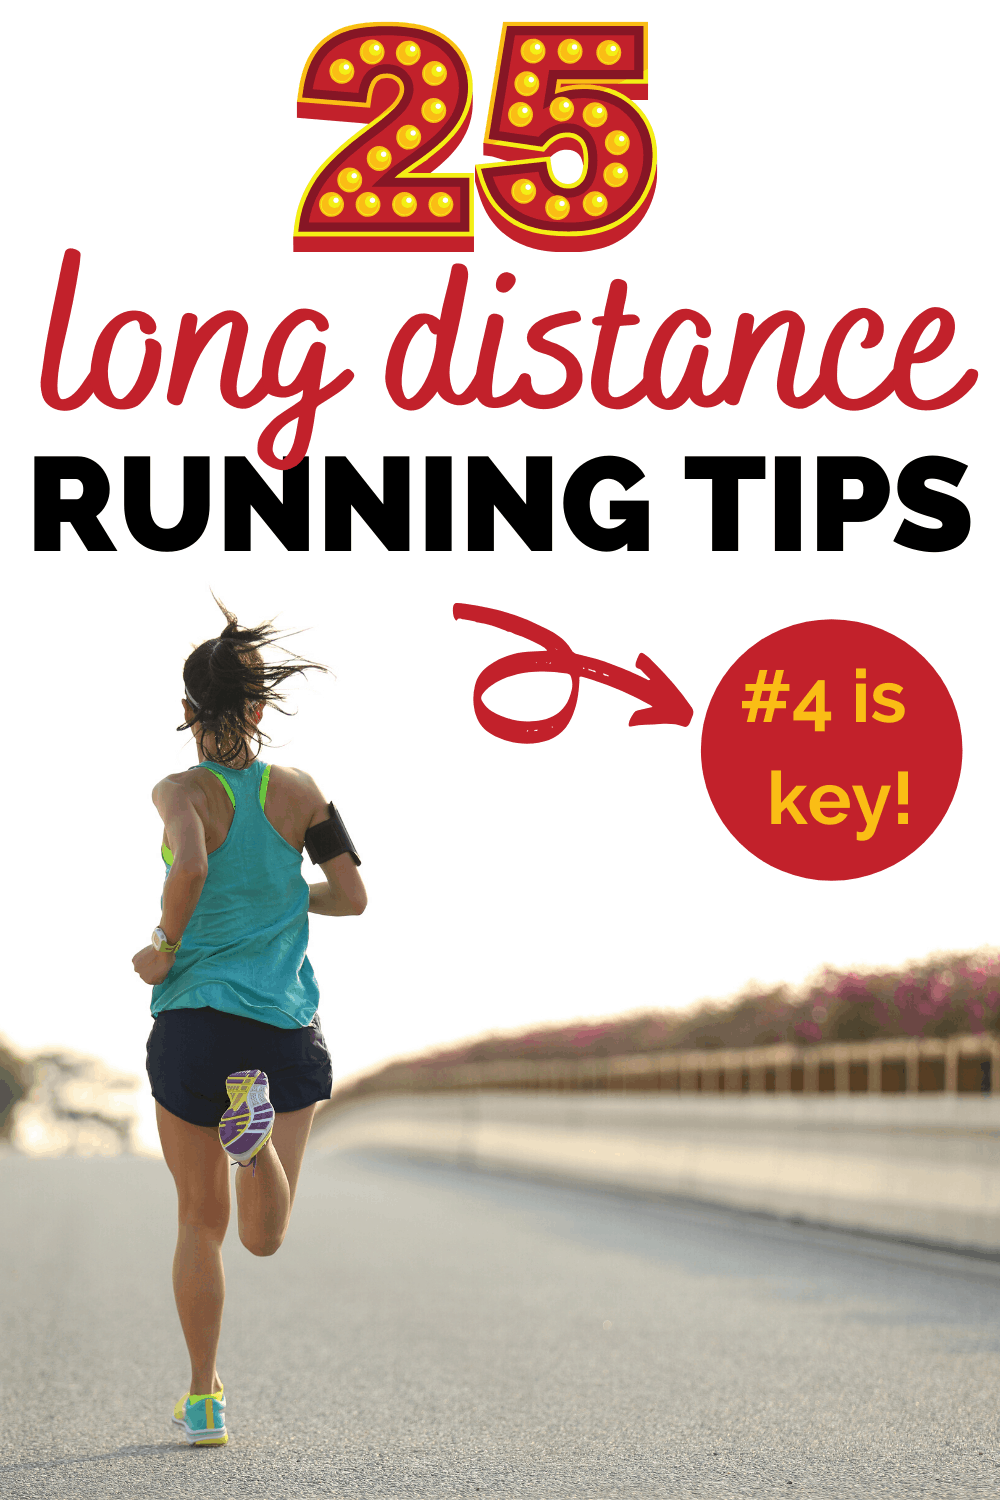 How To Improve My Long Distance Running